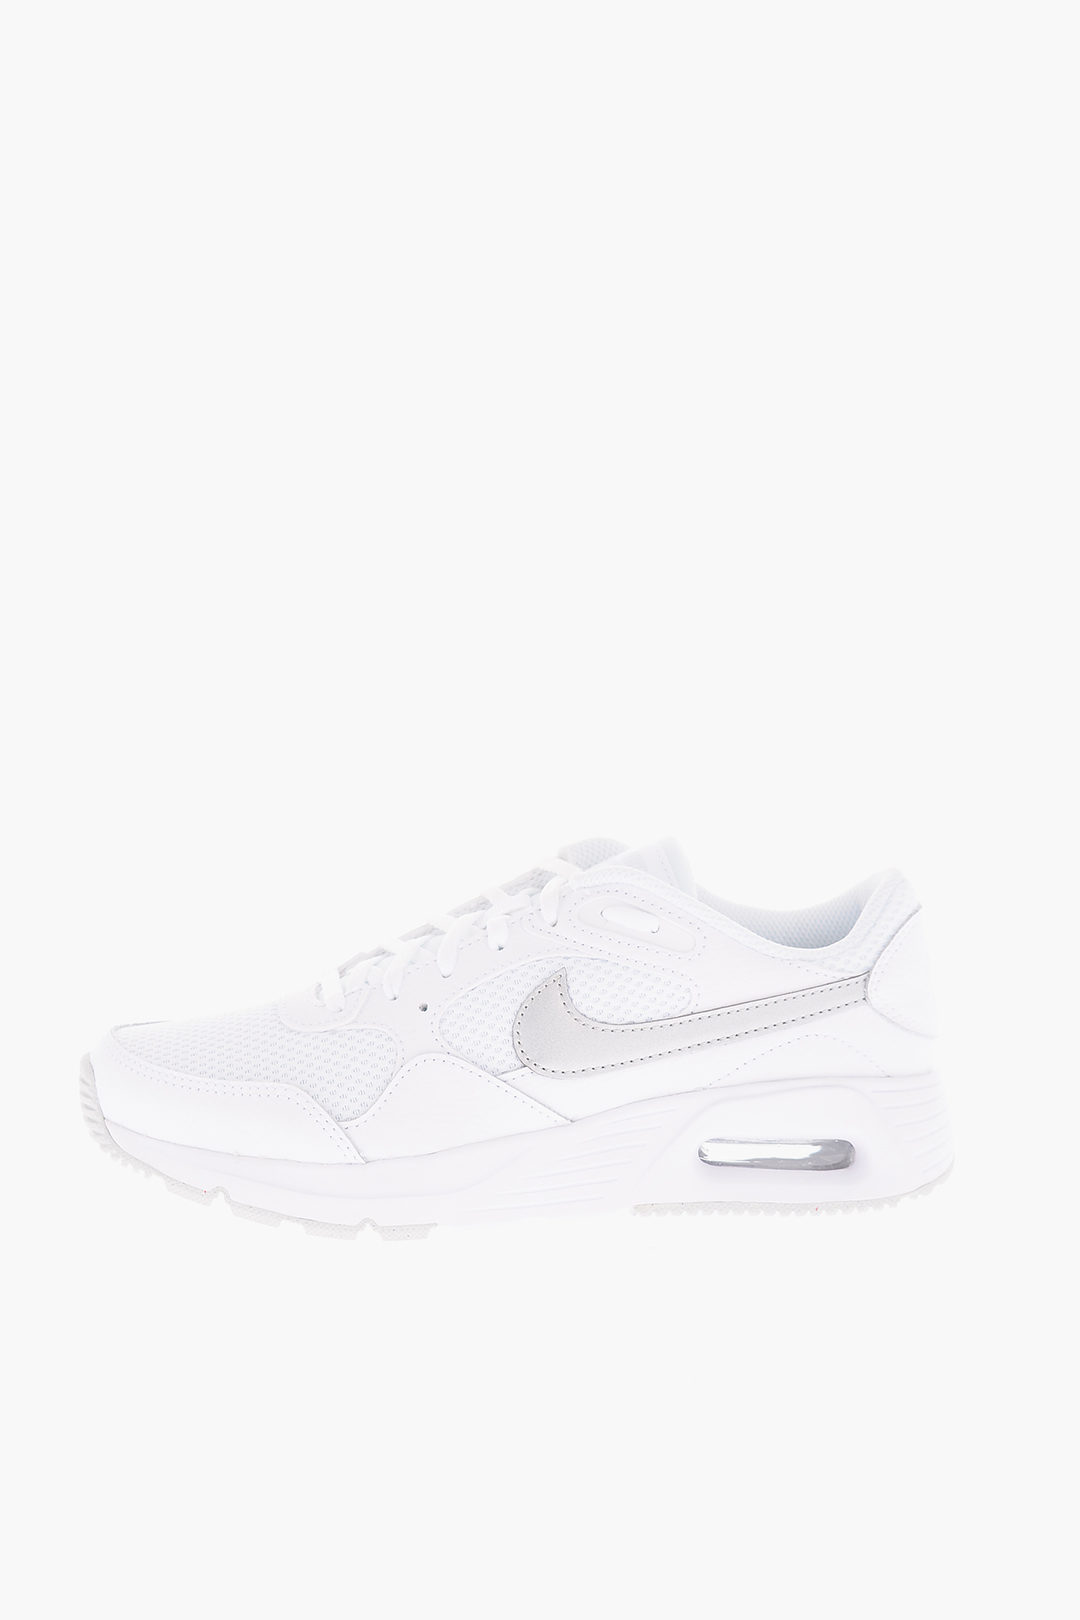 Concreet voertuig Offer Nike Leather and Fabric AIR MAX SC Sneakers with Air Bubble Sole women -  Glamood Outlet